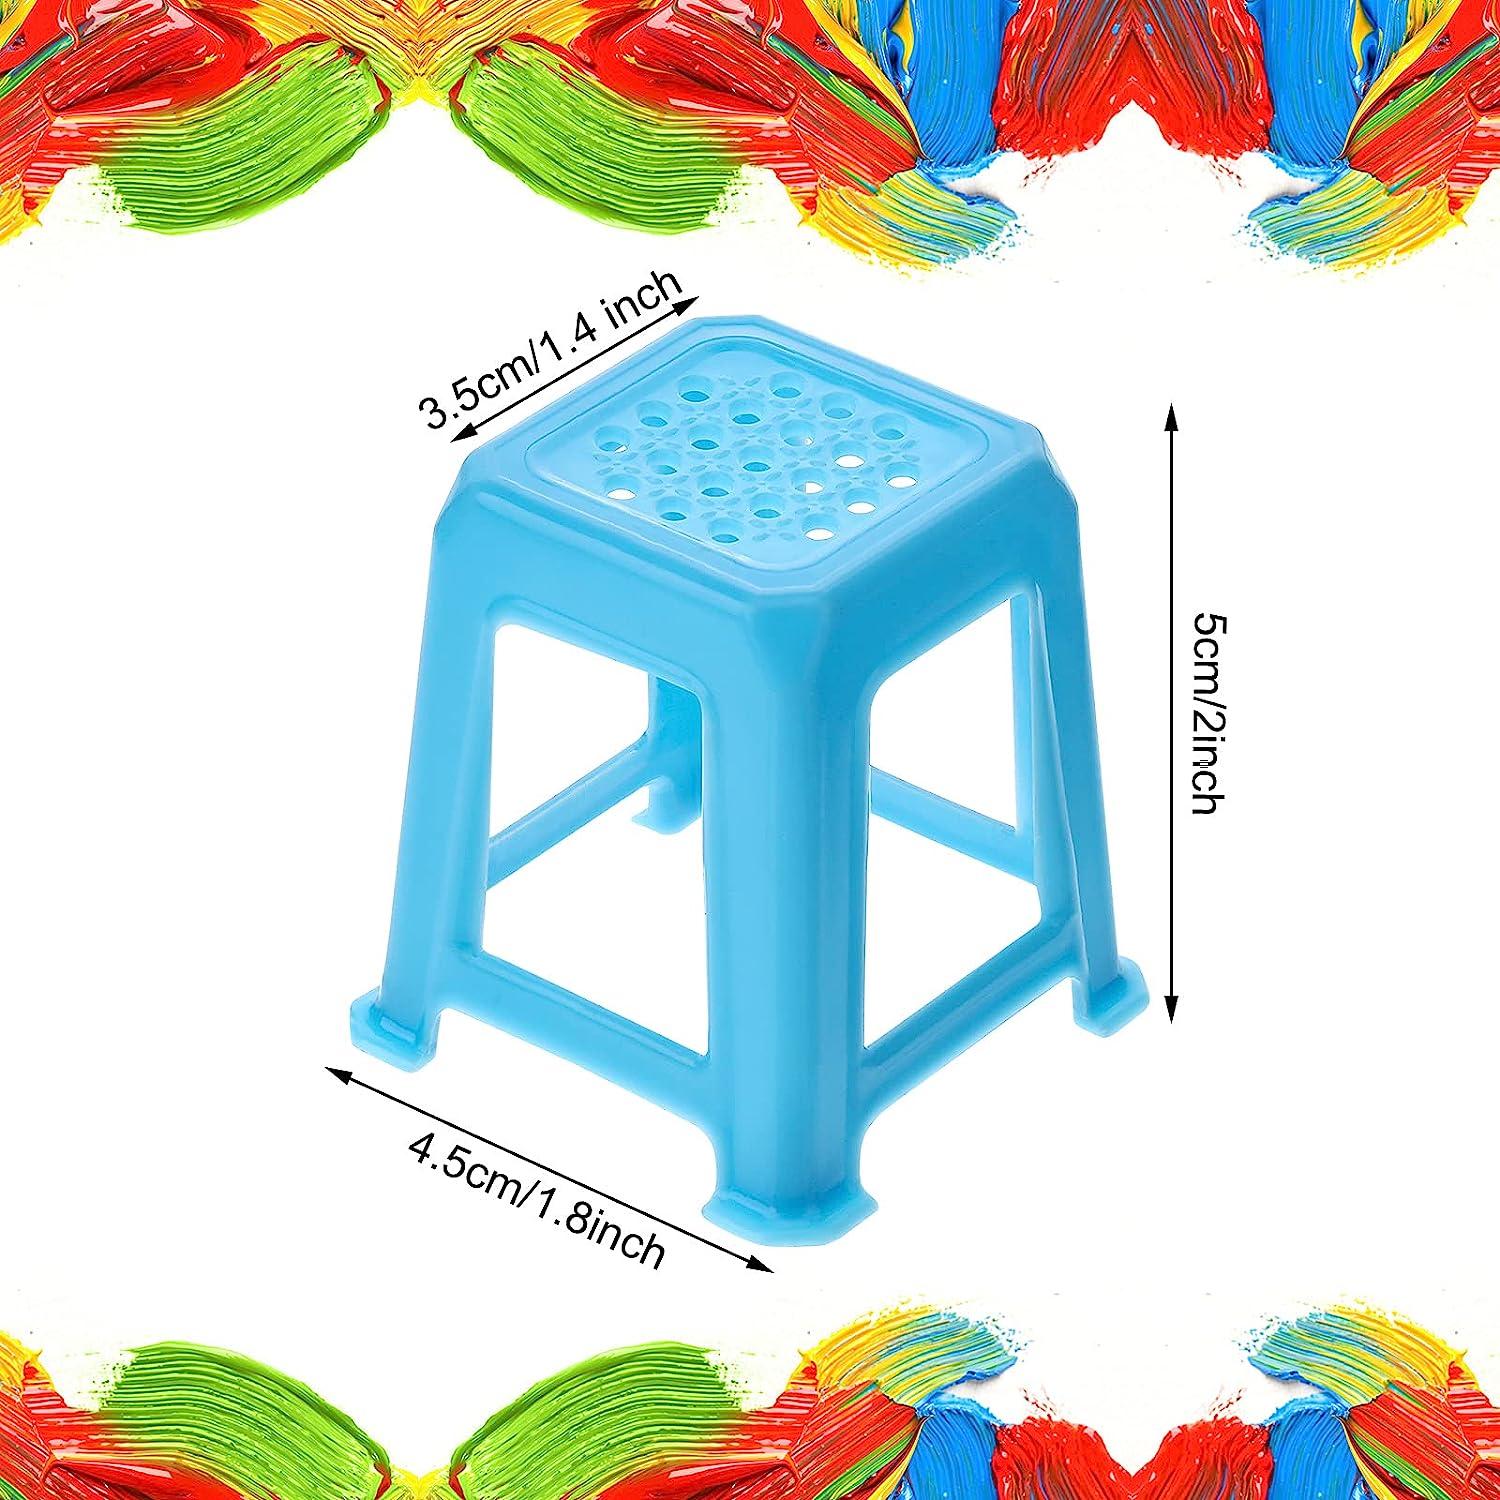 8 Pieces Canvas Stands Paint Stands for Painting Mini Canvas Feet Risers  Canvas Support Stands for Fluid Acrylic Pouring Paint Supplies (Blue)